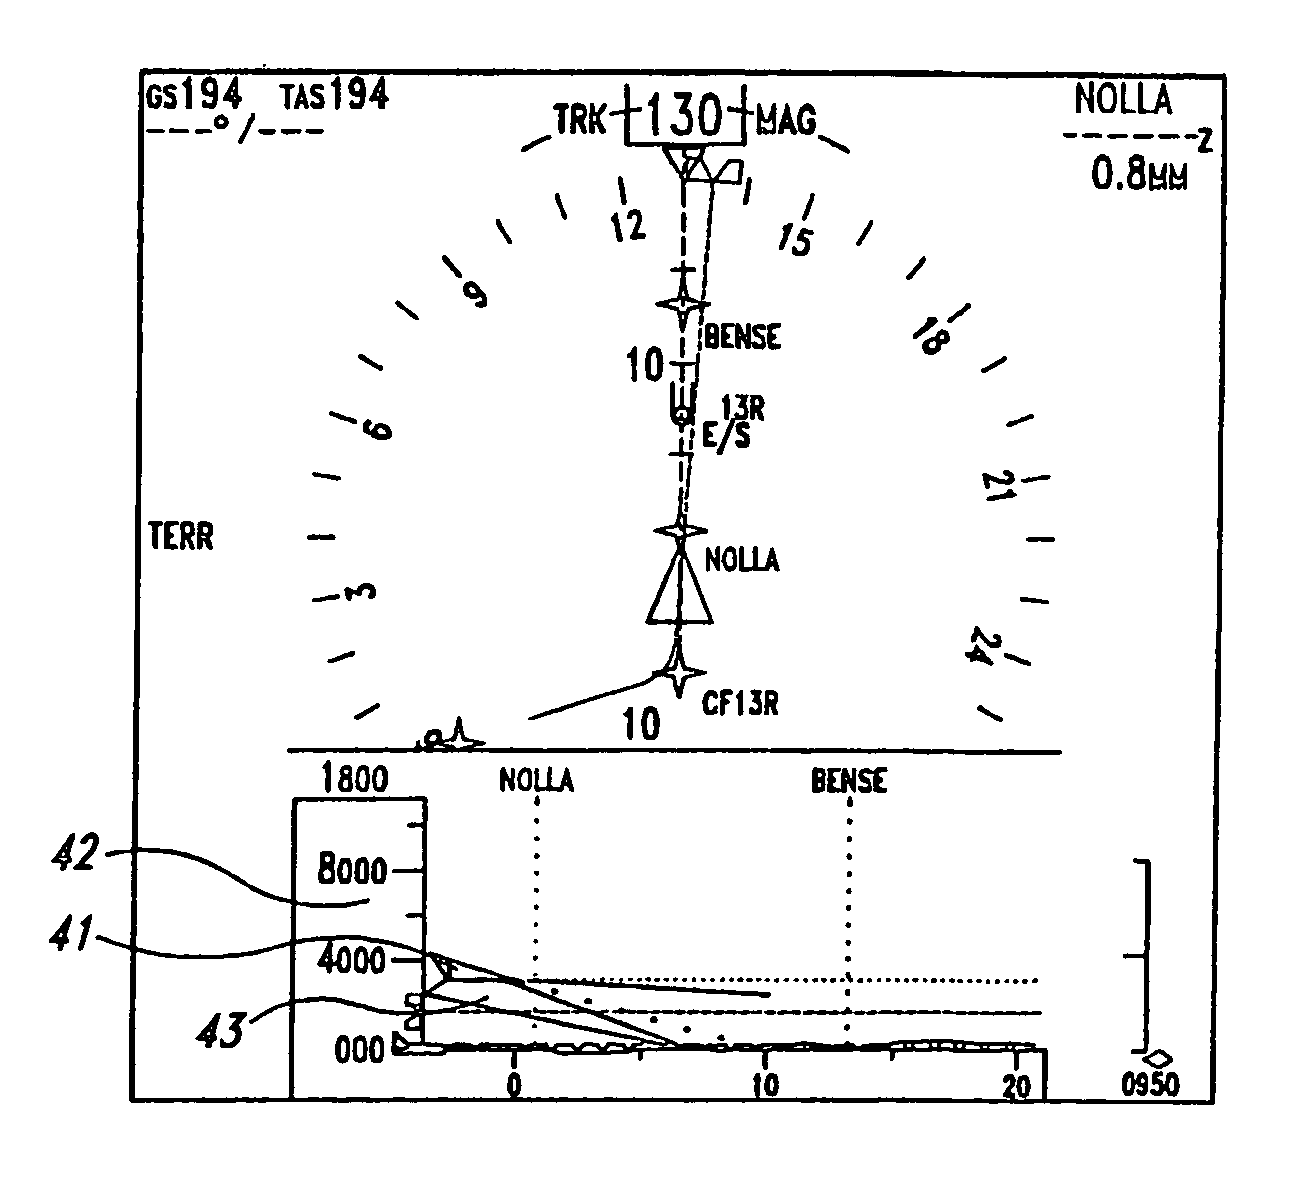 Vertical situation display terrain/waypoint swath, range to target speed, and blended airplane reference